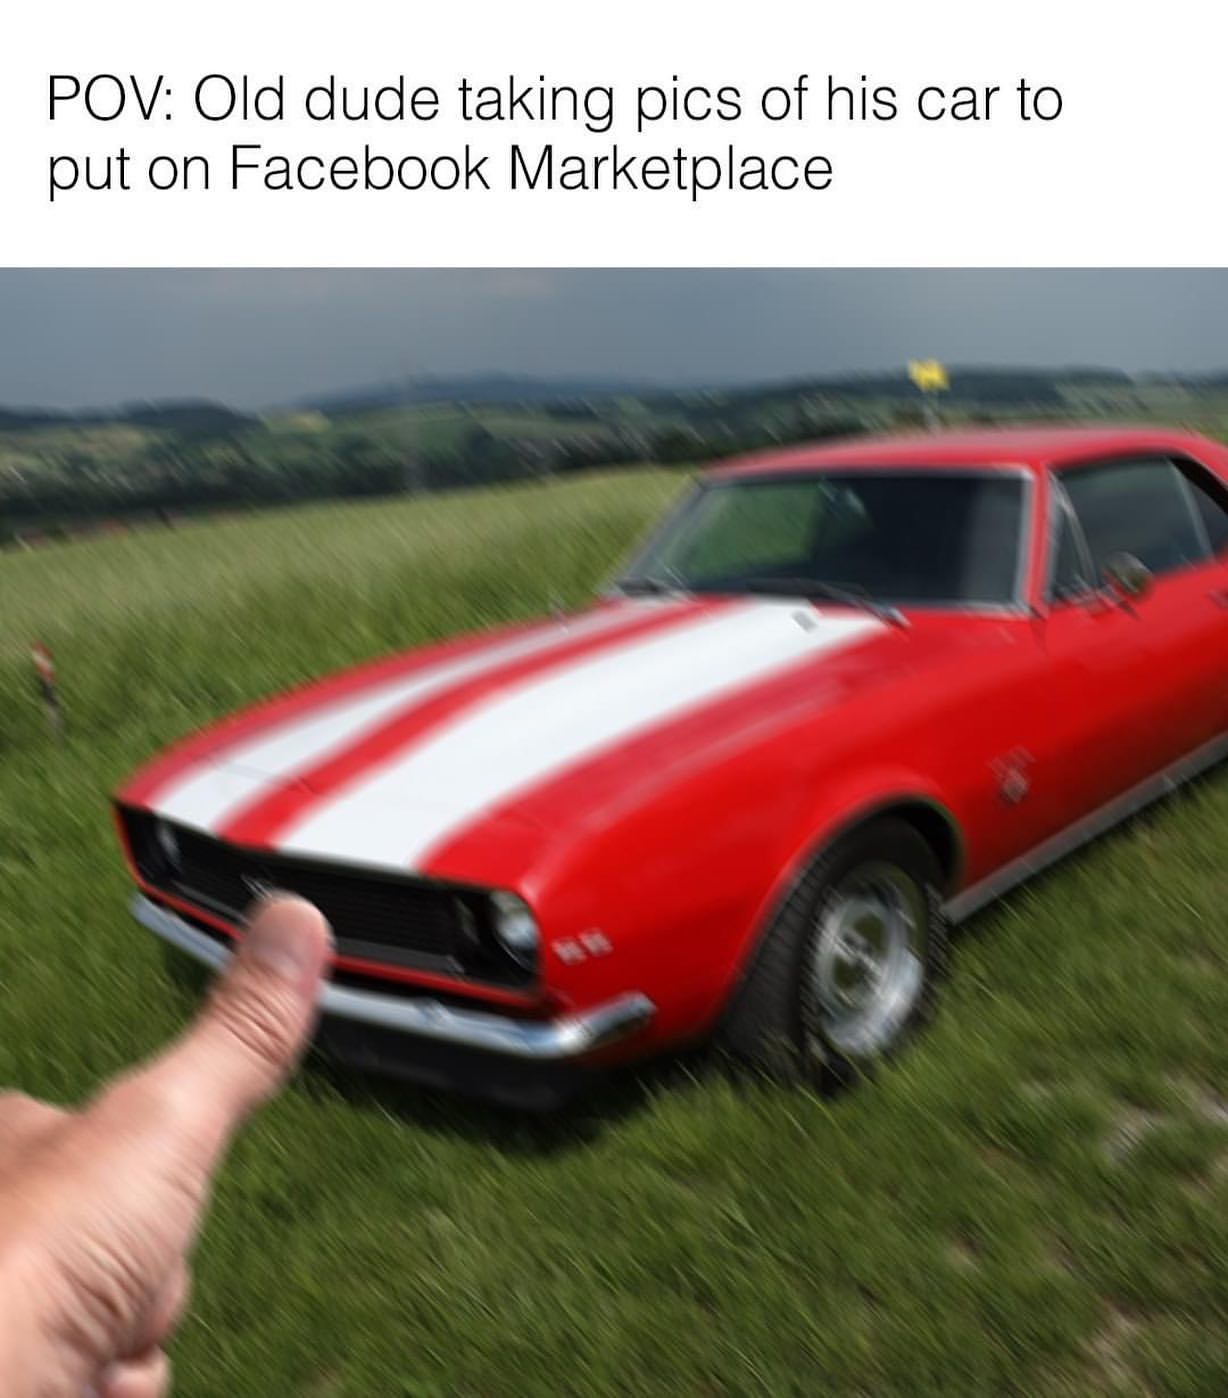 Pov: Old dude taking pics of his car to put on Facebook Marketplace.